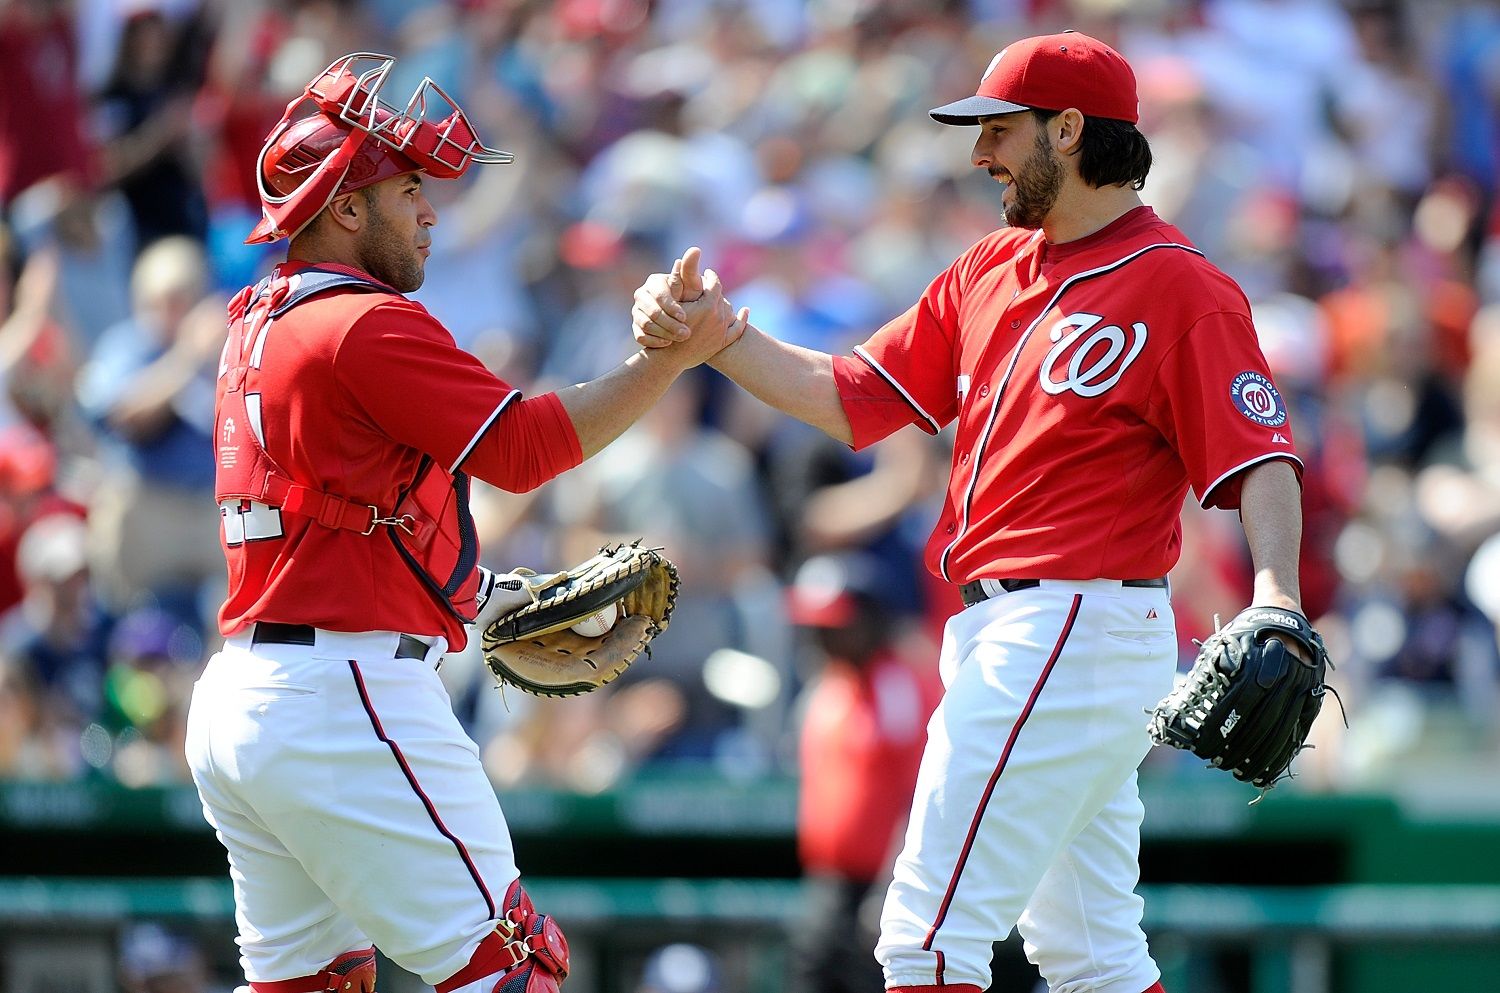 WASHINGTON, DC - APRIL 26:  Tanner Roark #57 of the Washington Nationals celebrates with Sandy Leon #41 after pitching a complete game shutout against the San Diego Padres at Nationals Park on April 26, 2014 in Washington, DC. Washington won the game 4-0.  (Photo by Greg Fiume/Getty Images)